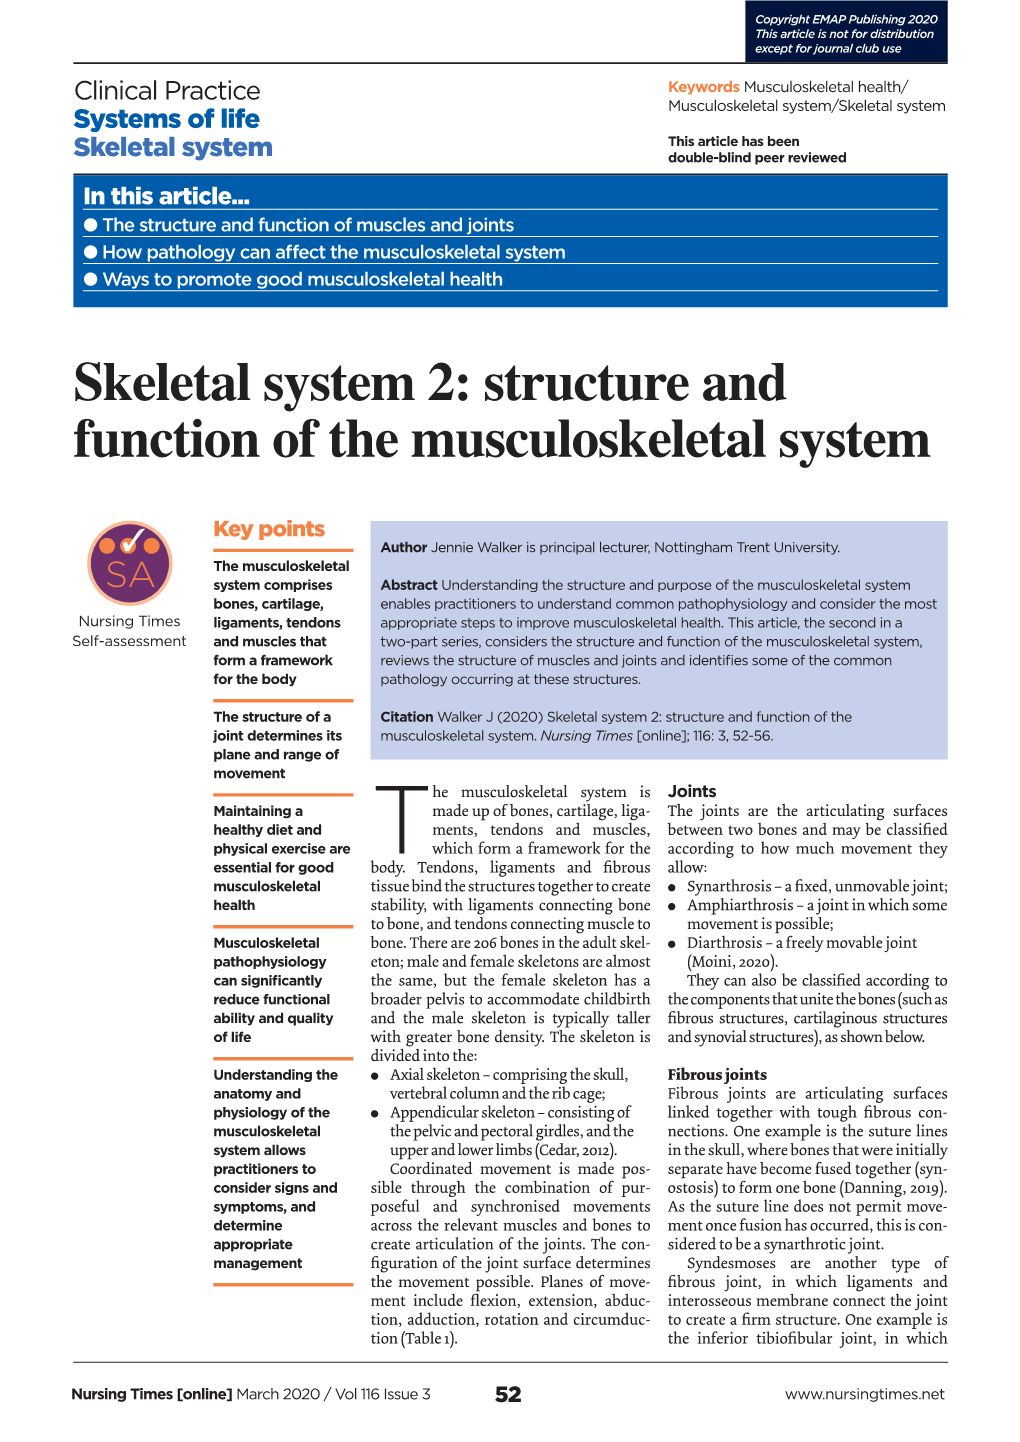 Skeletal System 2: Structure and Function of the Musculoskeletal System